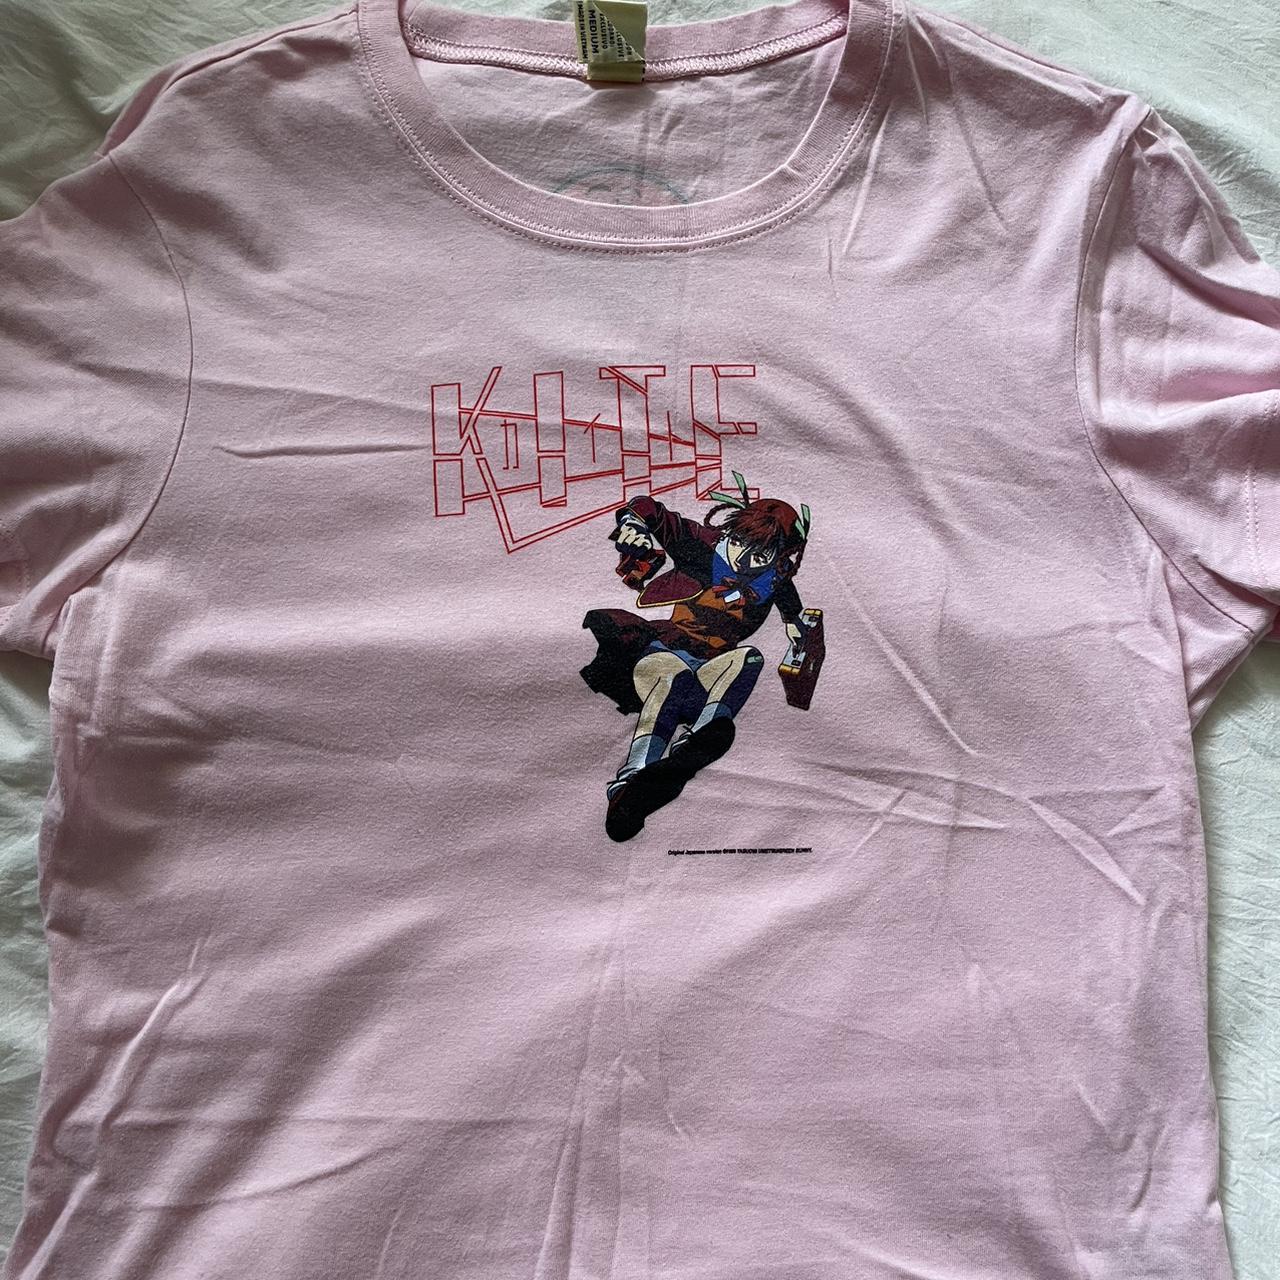 KITE vintage anime shirt , Worn once or twice and has